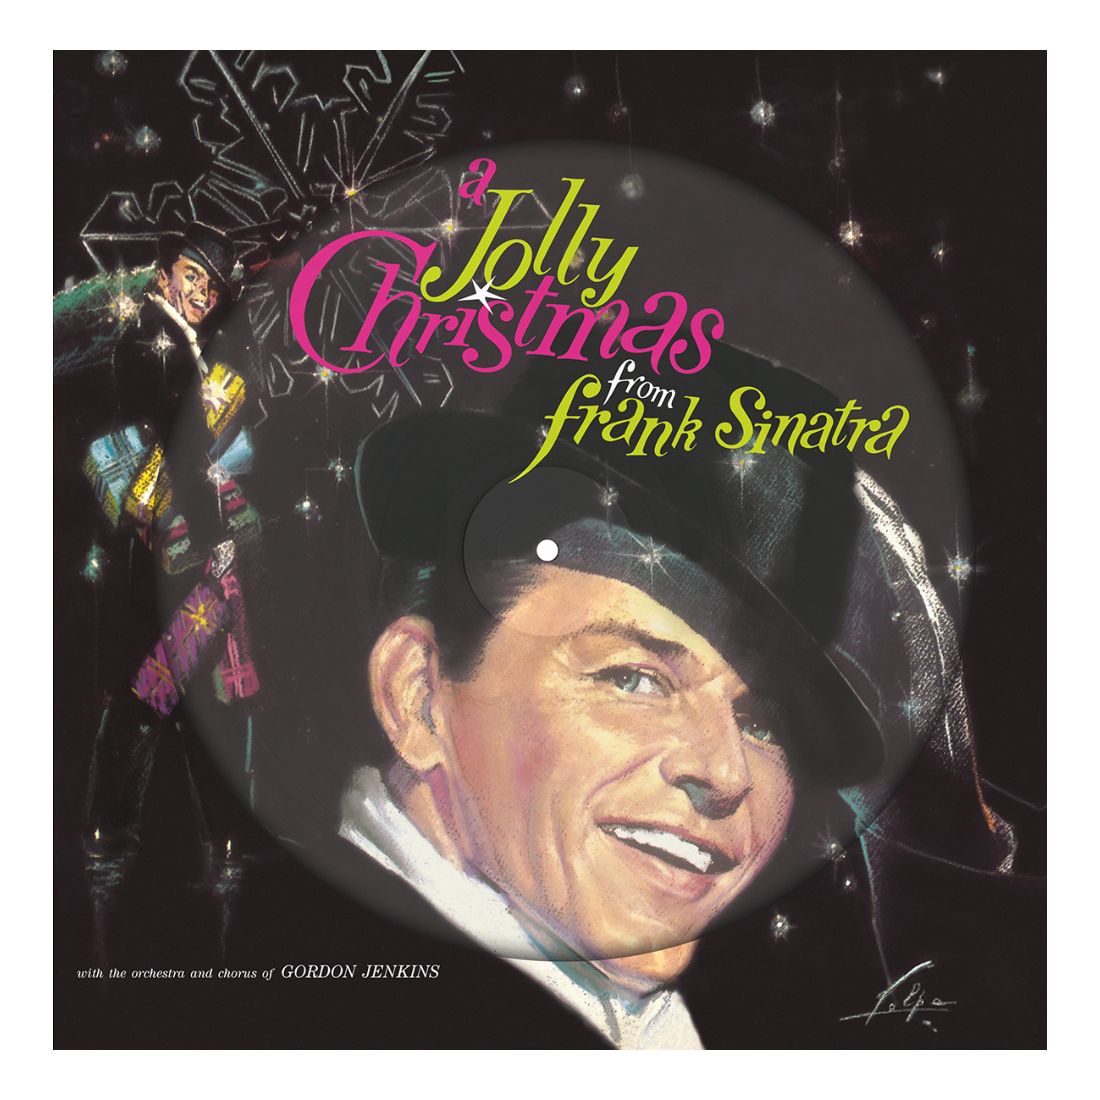 Виниловая пластинка A Jolly Christmas from Frank Sinatra (Picture Disc) | Frank Sinatra sinatra frank виниловая пластинка sinatra frank a jolly christmas